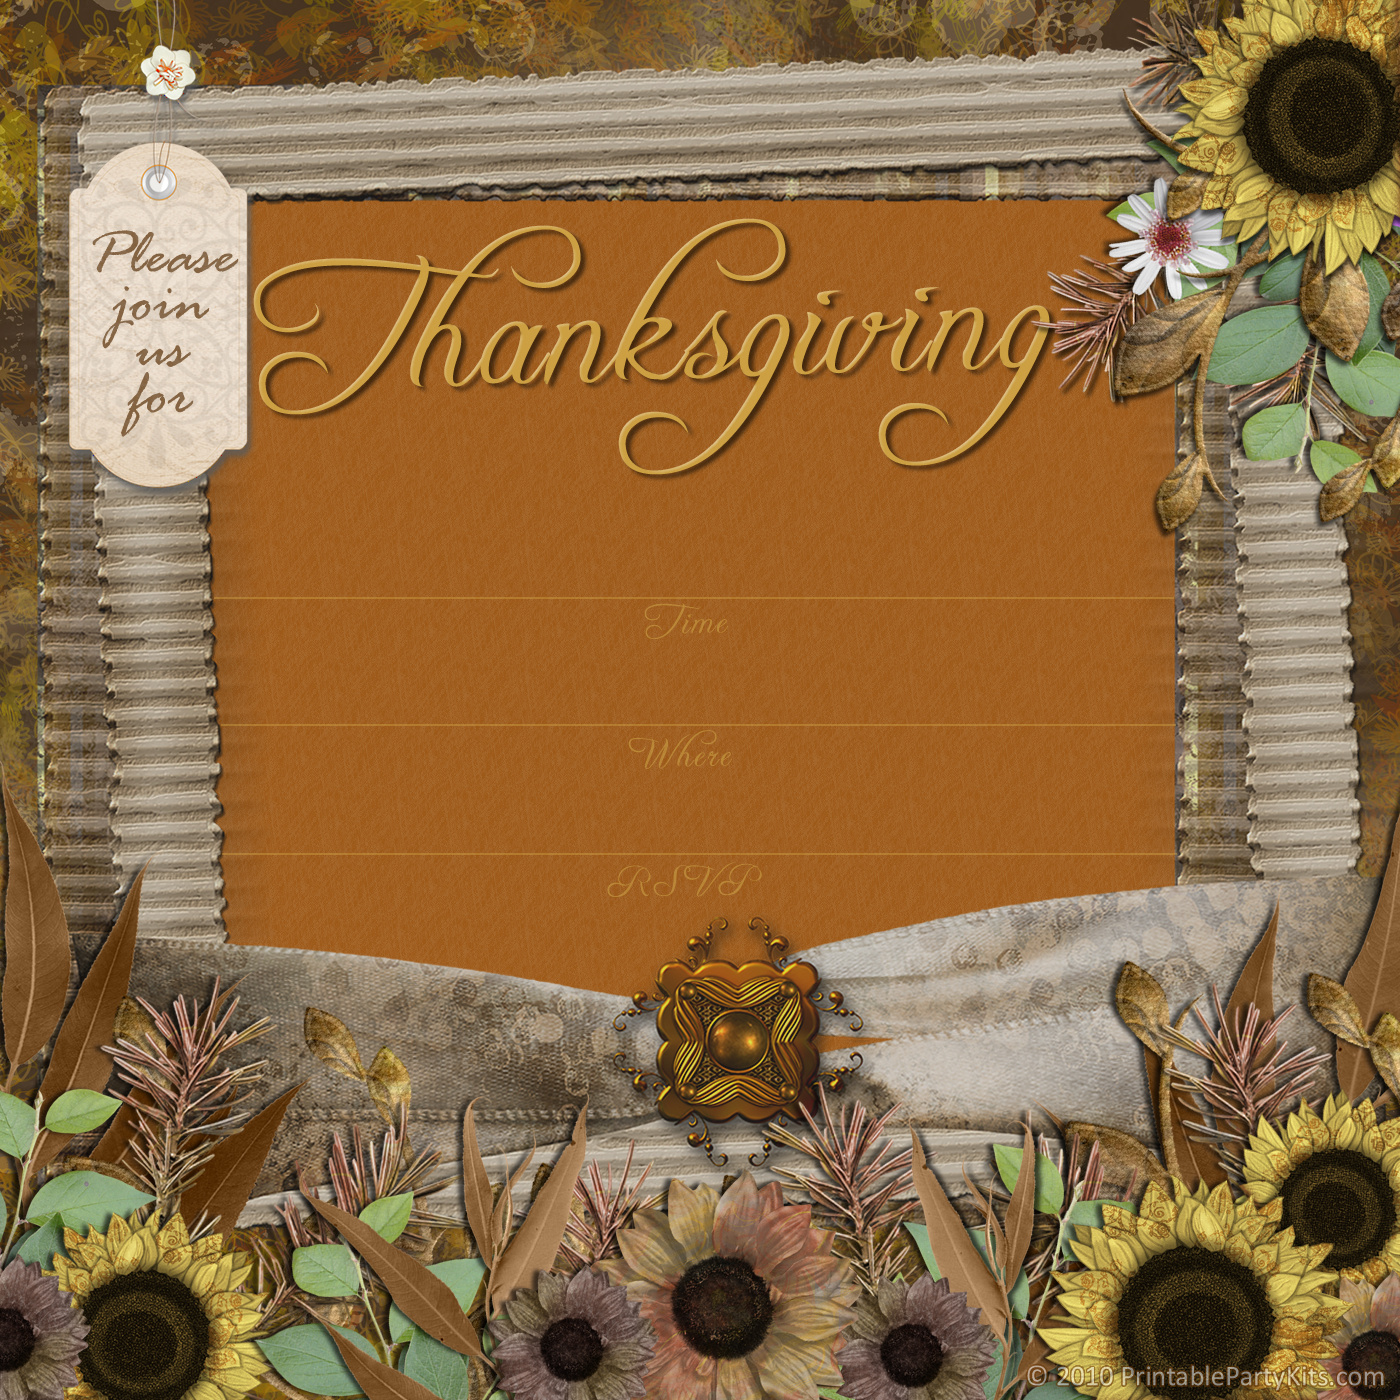 top-15-thanksgiving-dinner-invitations-easy-recipes-to-make-at-home